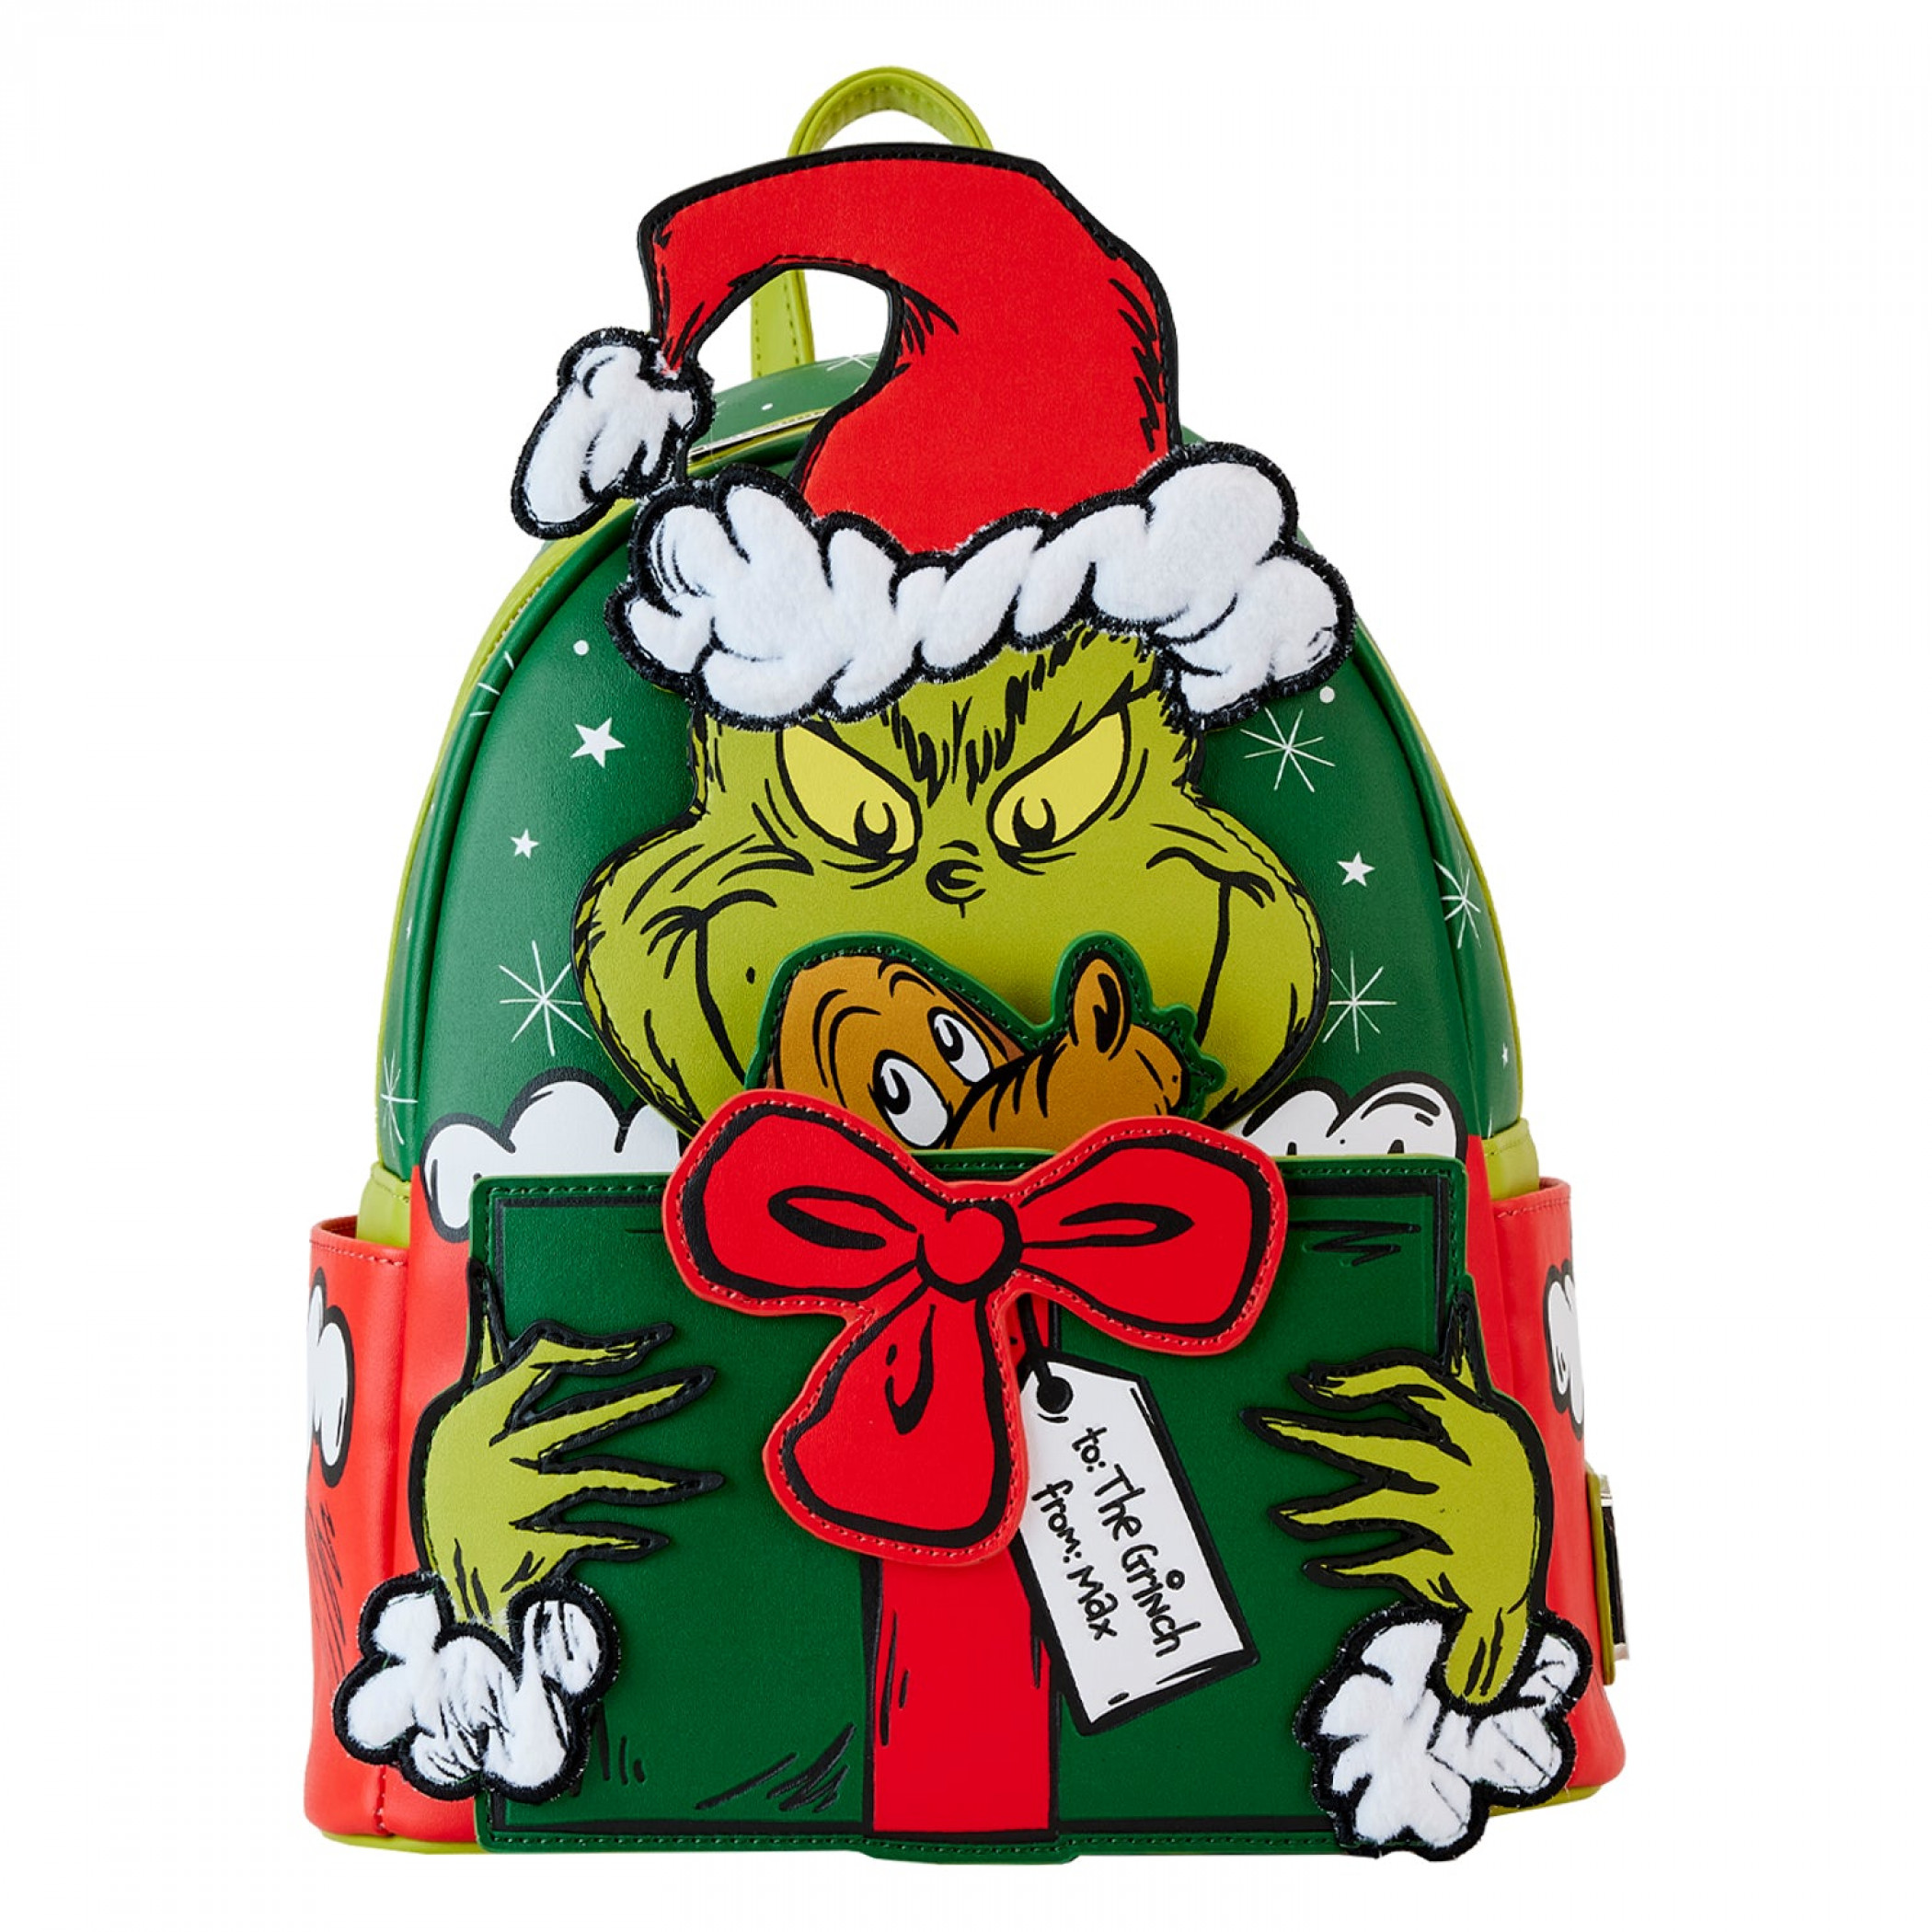 How The Grinch Stole Christmas Mini Backpack by Loungefly